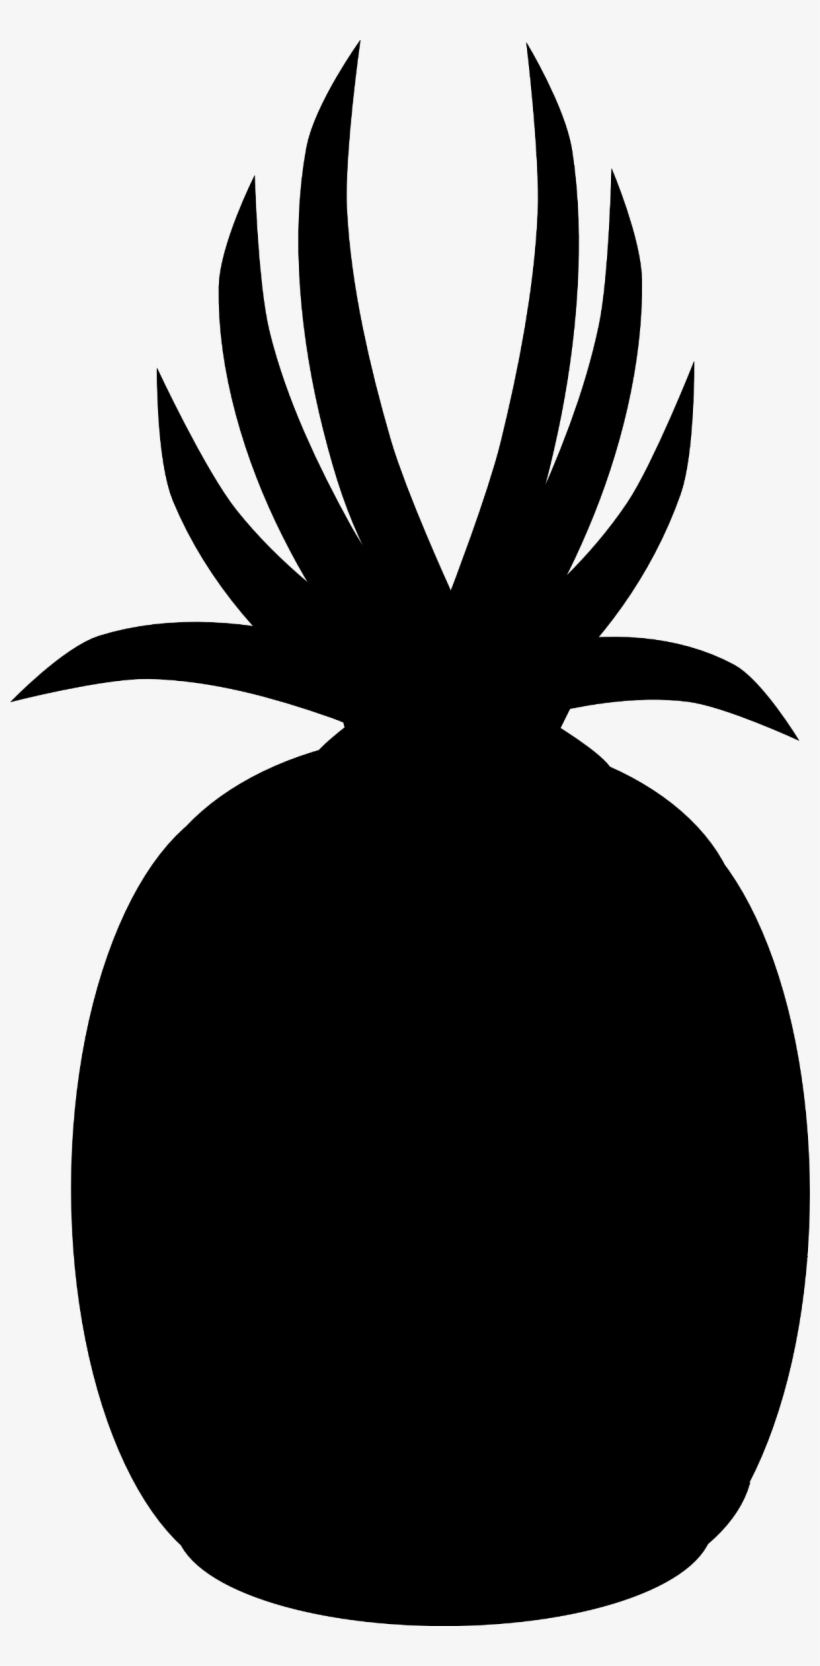 Pineapple Silhouette - Pineapple Silhouette Png, transparent png #1693995